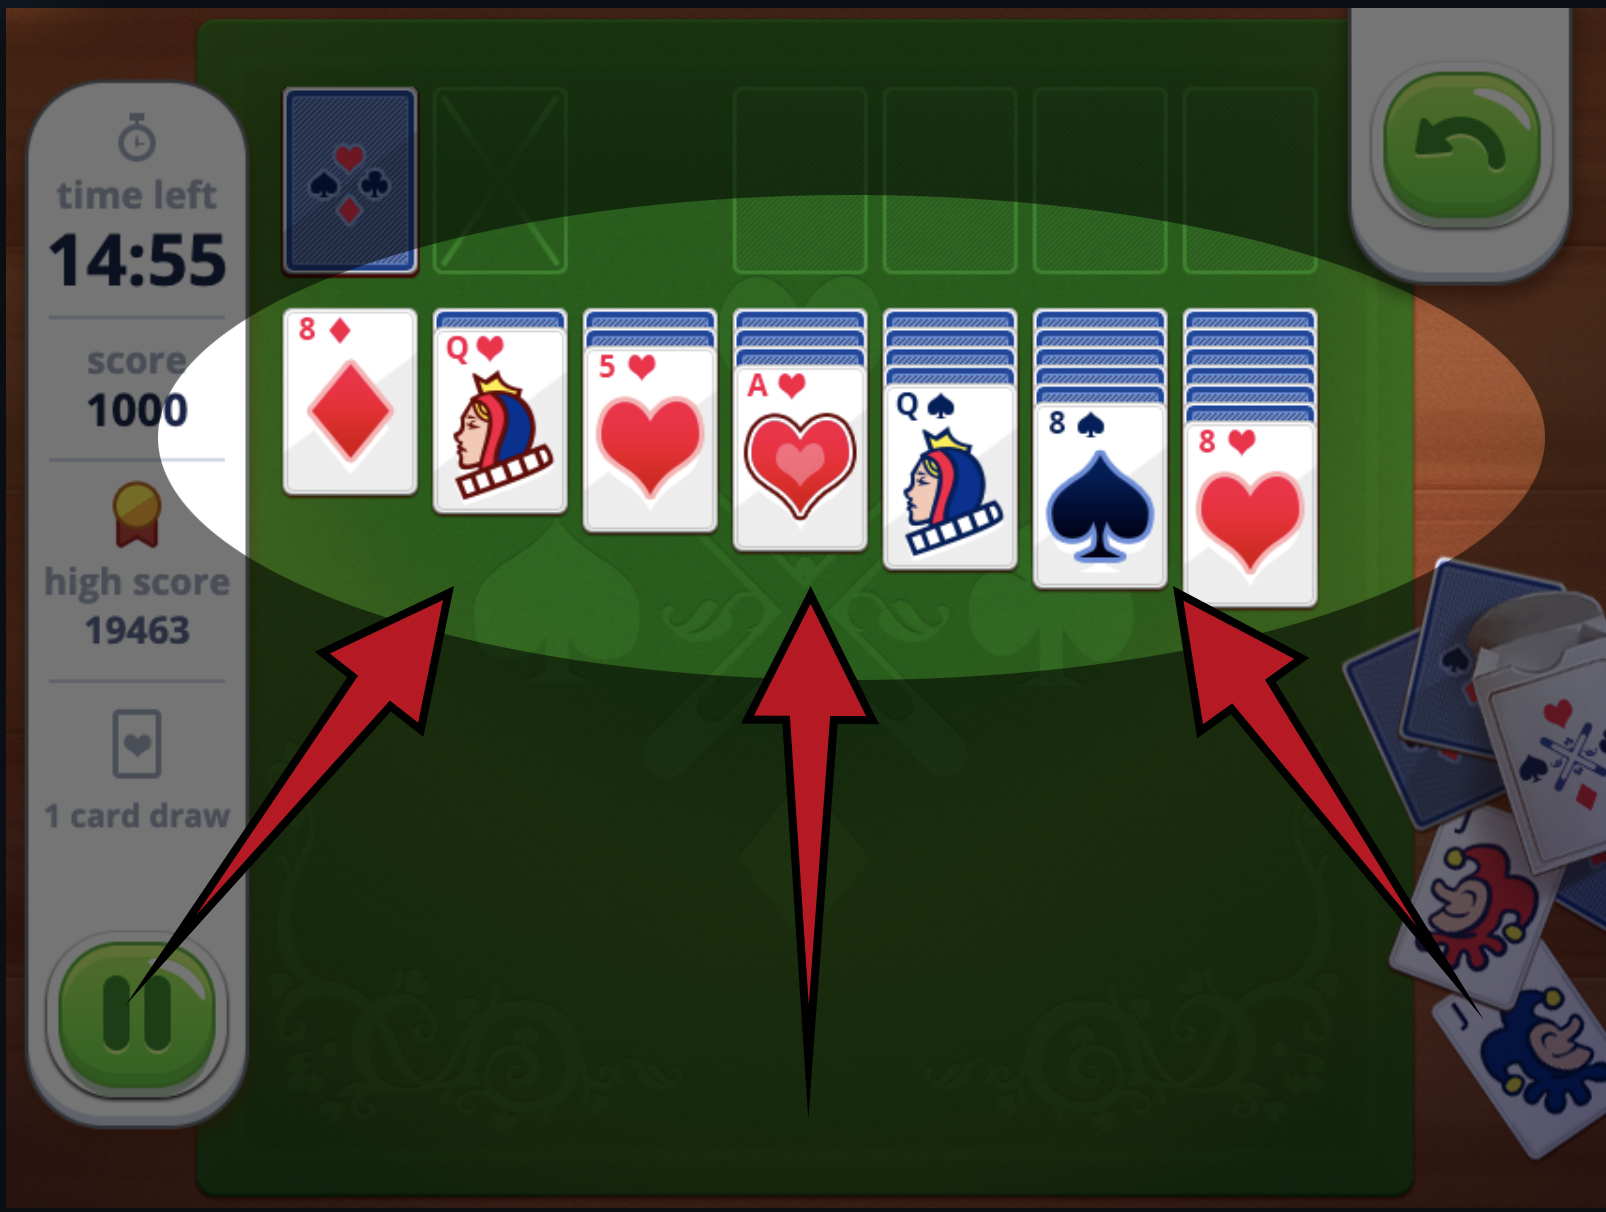 How to Play Solitaire - Play it Online at Coolmath Games